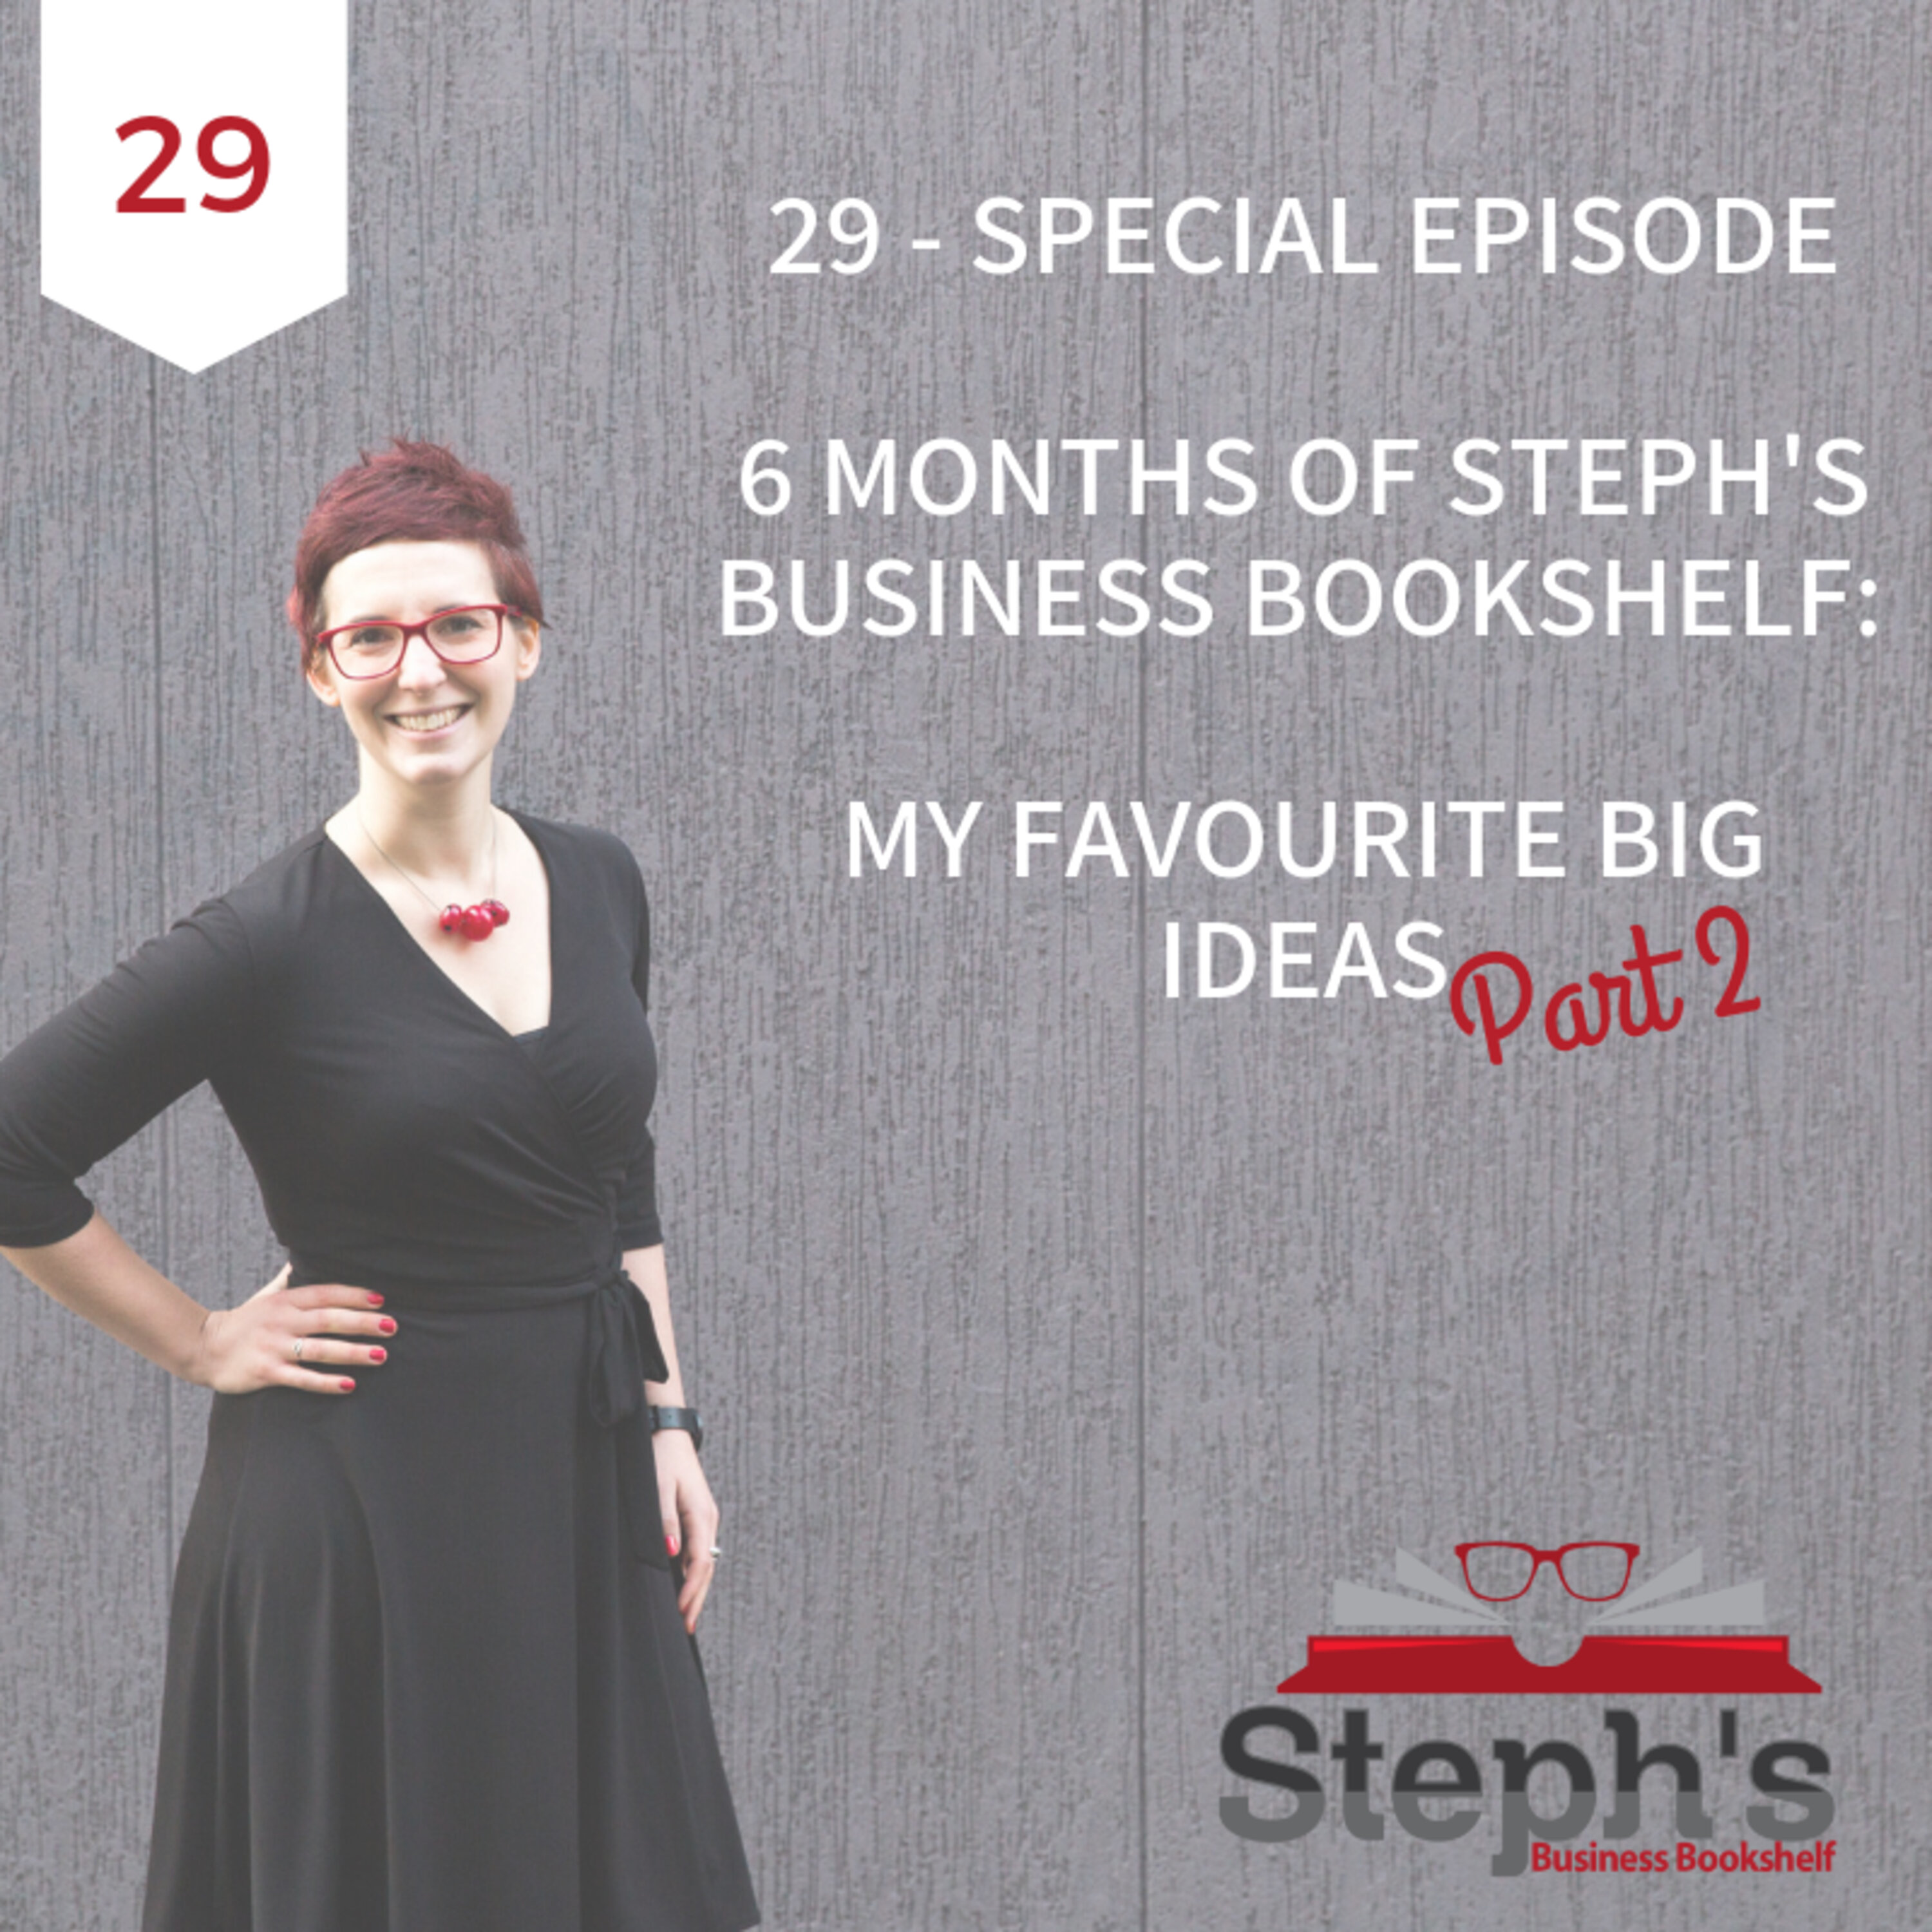 10 Big Ideas About Work From 20 Episodes of Steph’s Business Bookshelf – Part 2 Image